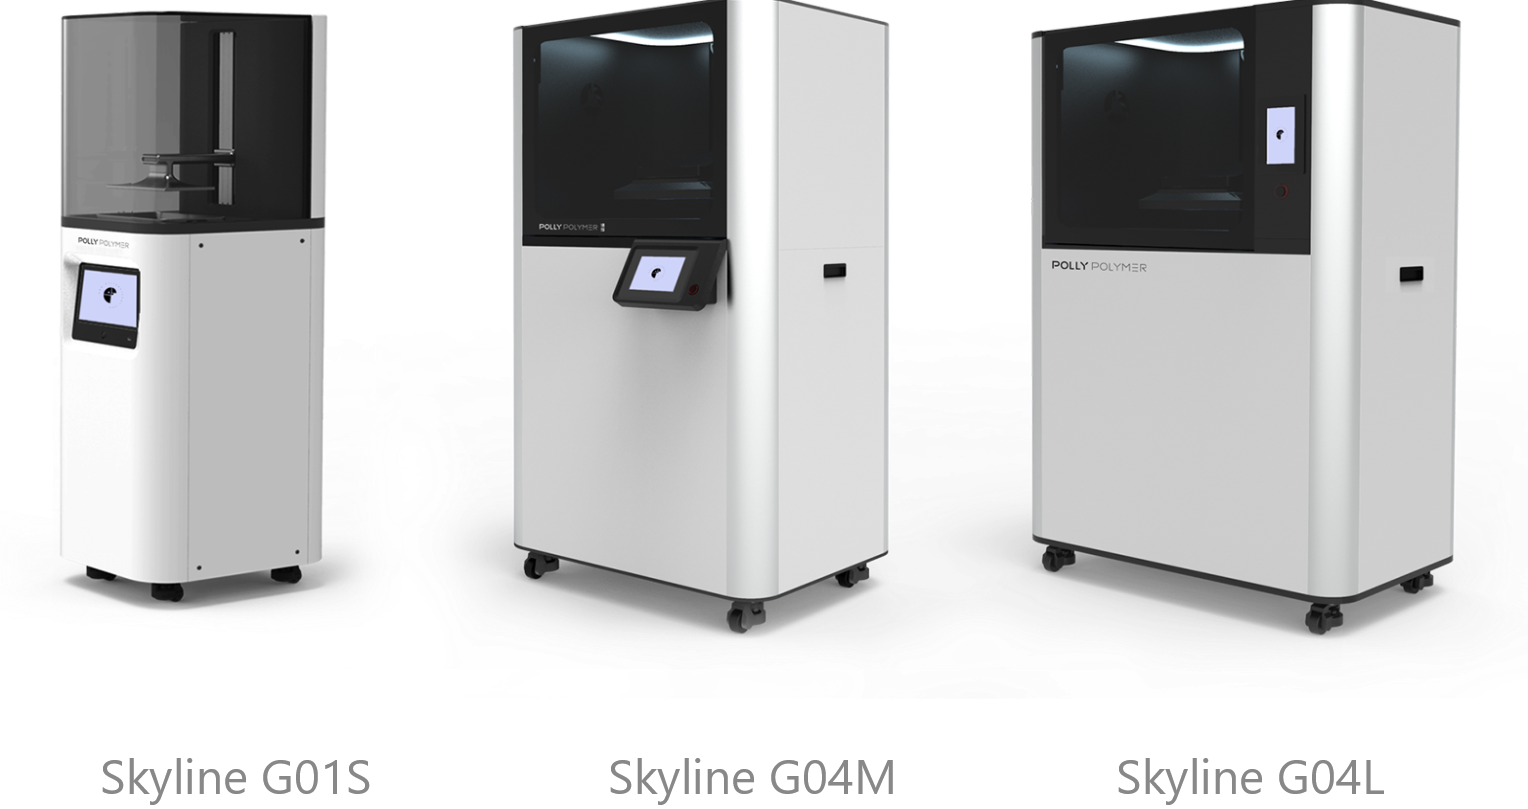 Polly Polymer's line of 3D printing systems.